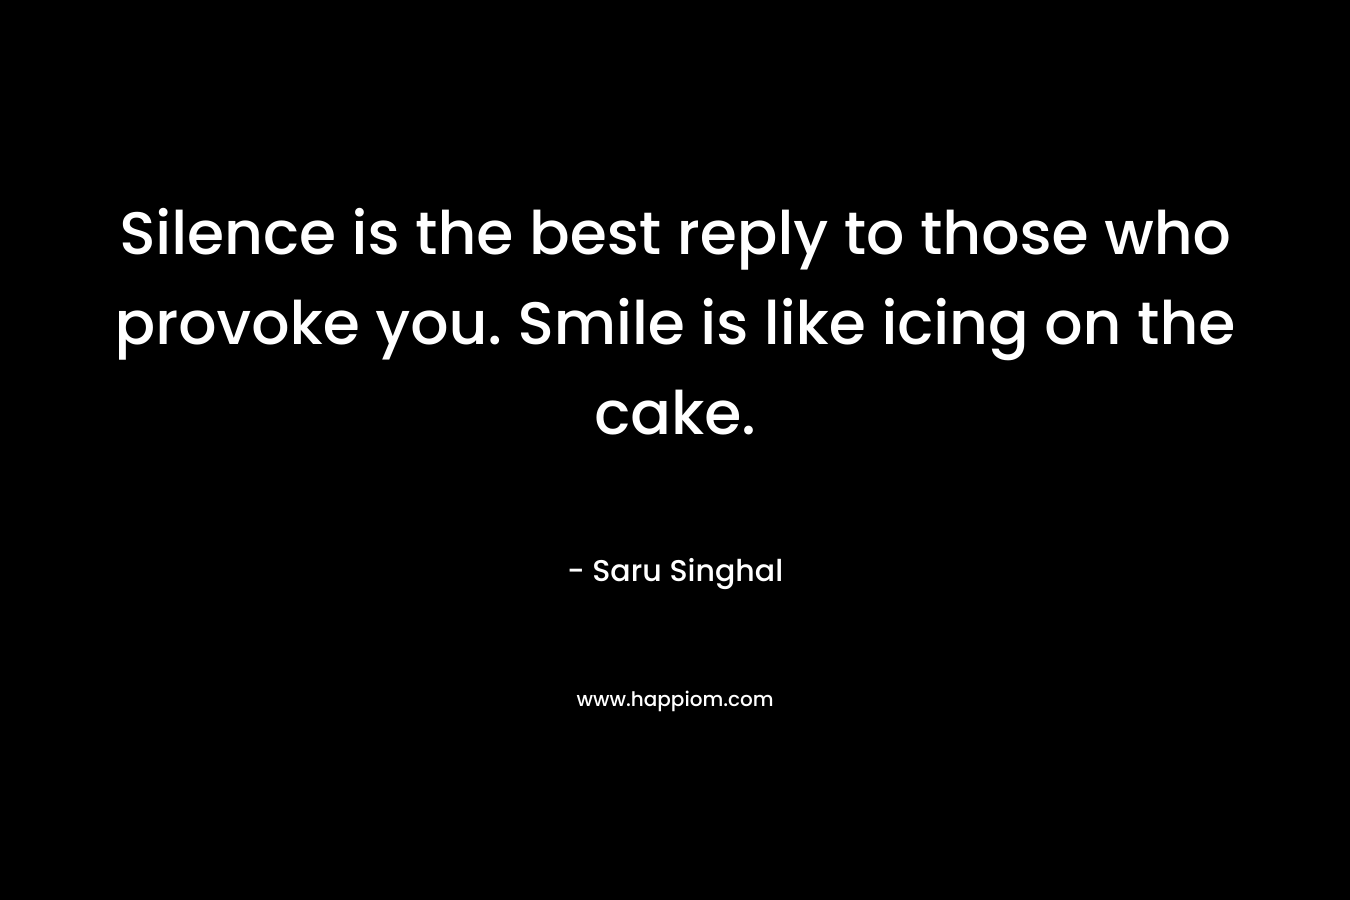 Silence is the best reply to those who provoke you. Smile is like icing on the cake.